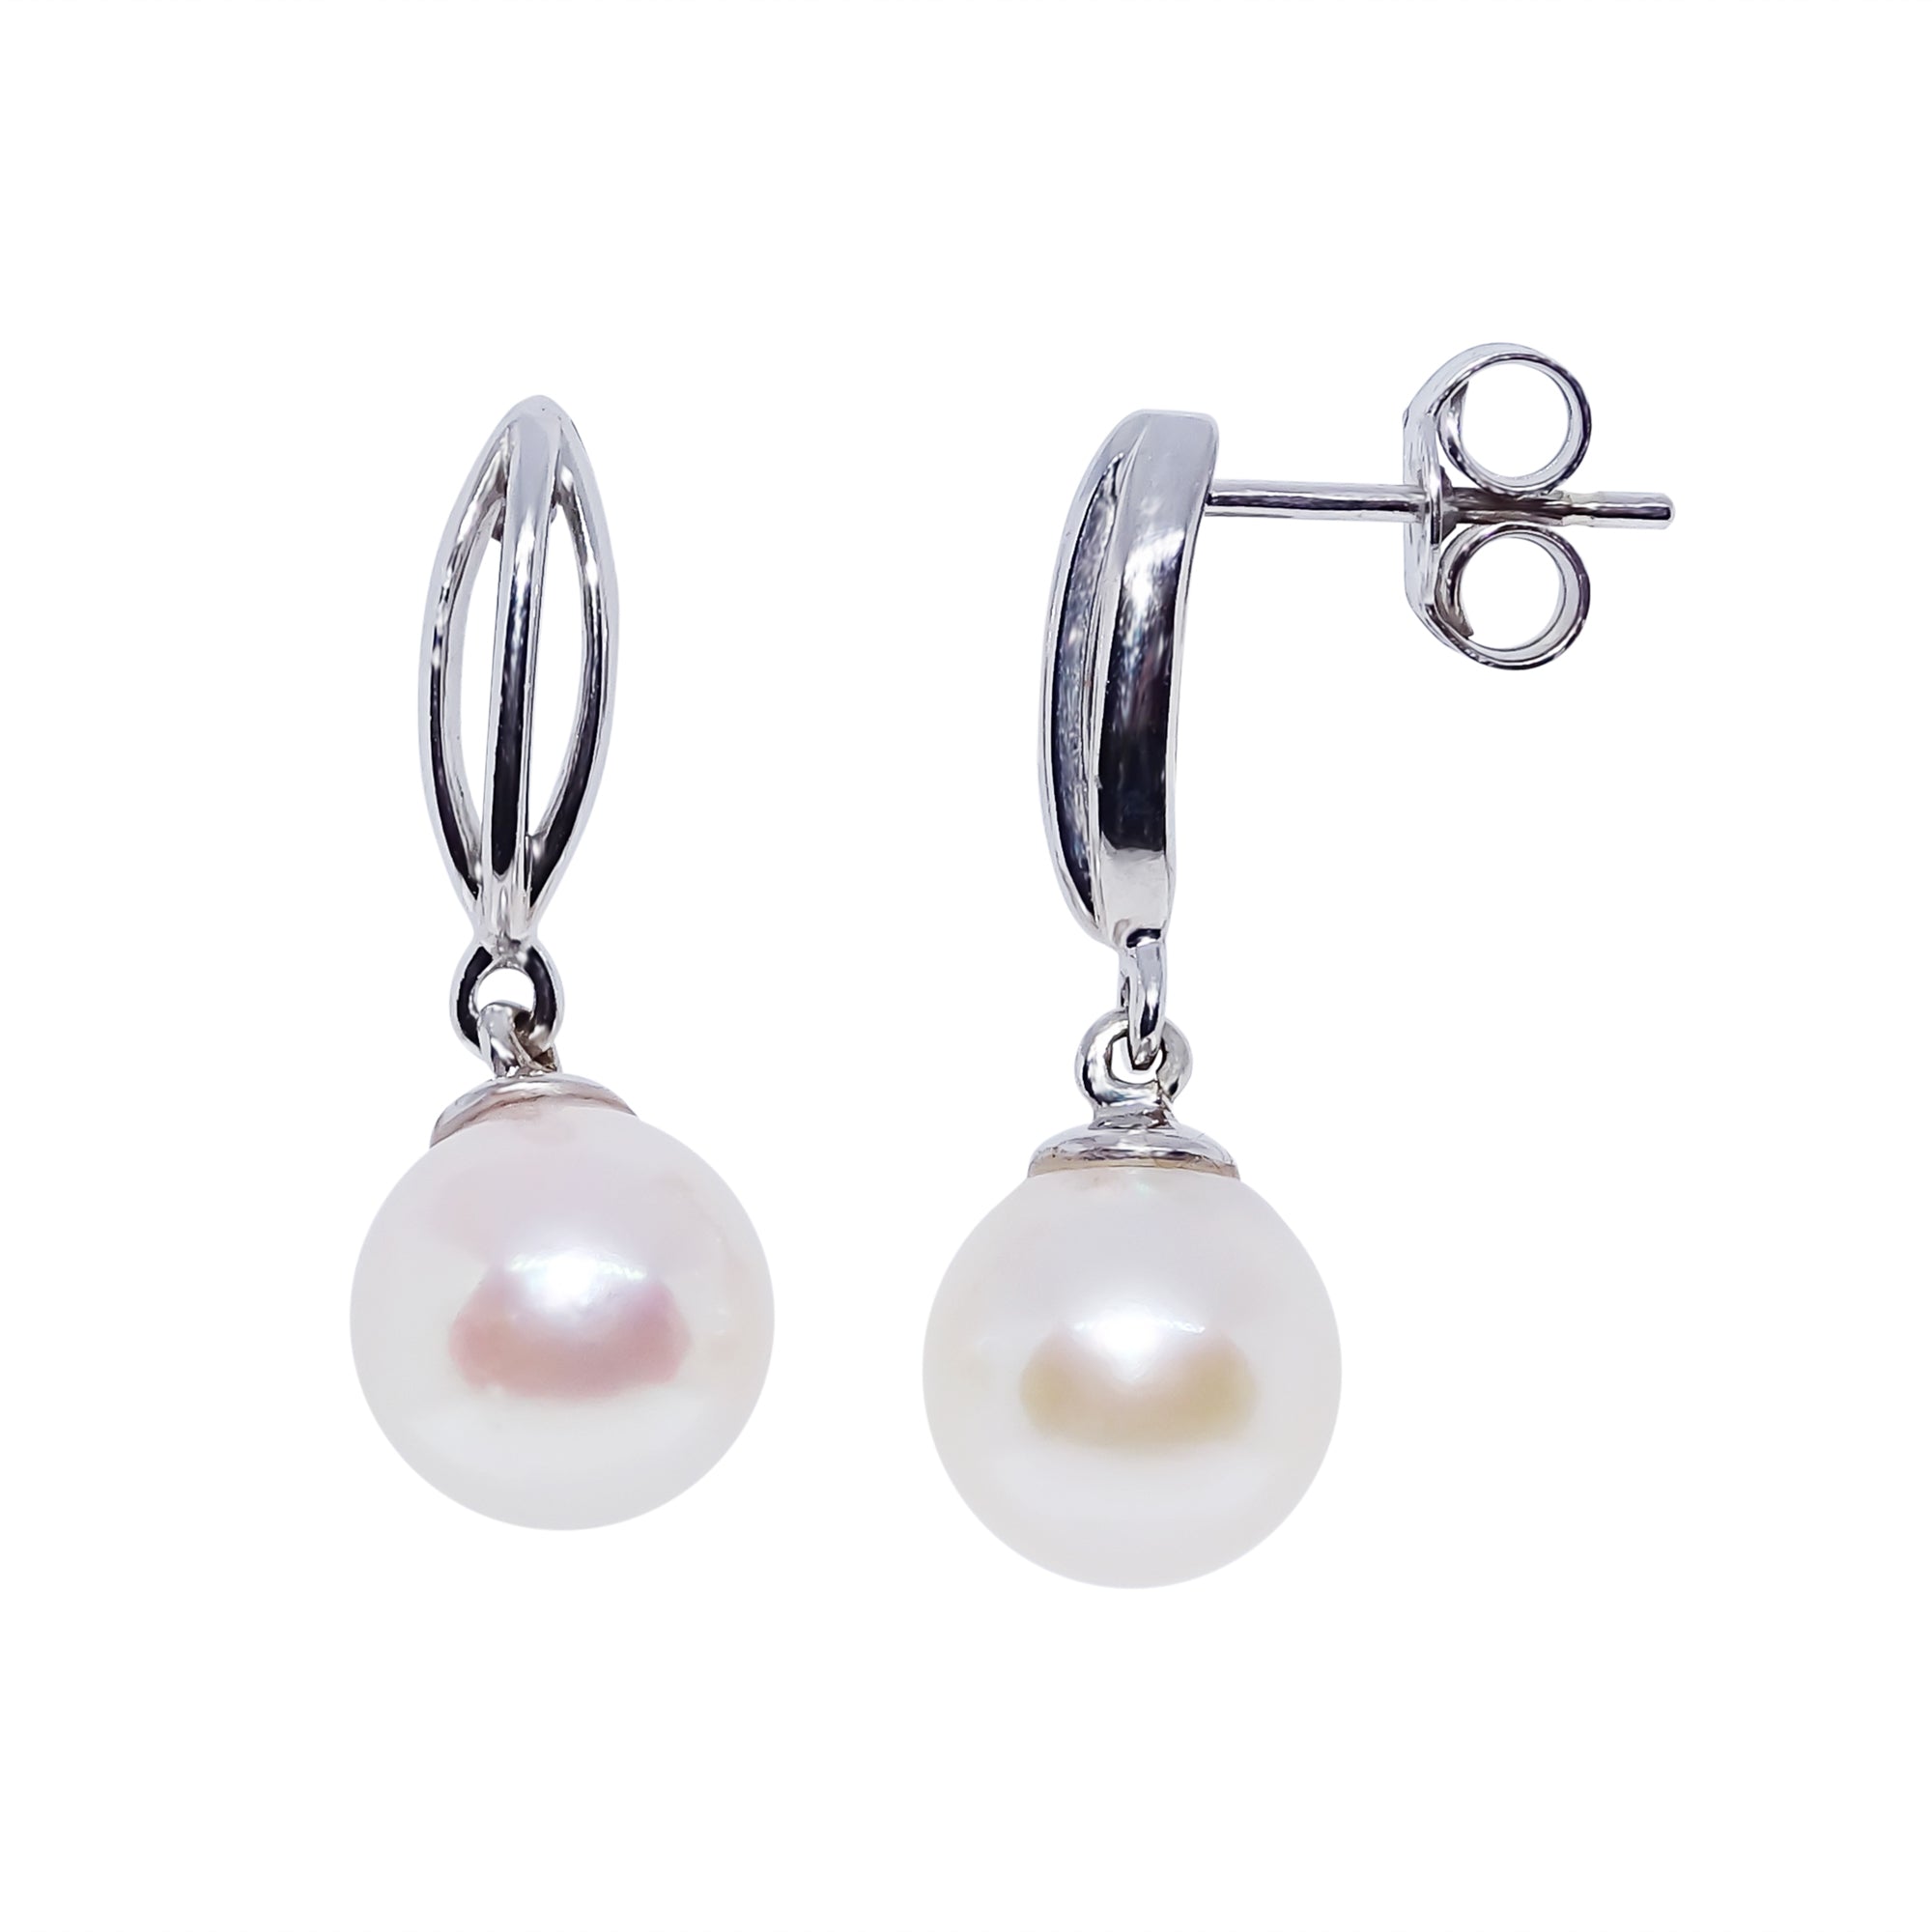 9ct white gold 7.5mm cultured pearl drop earrings